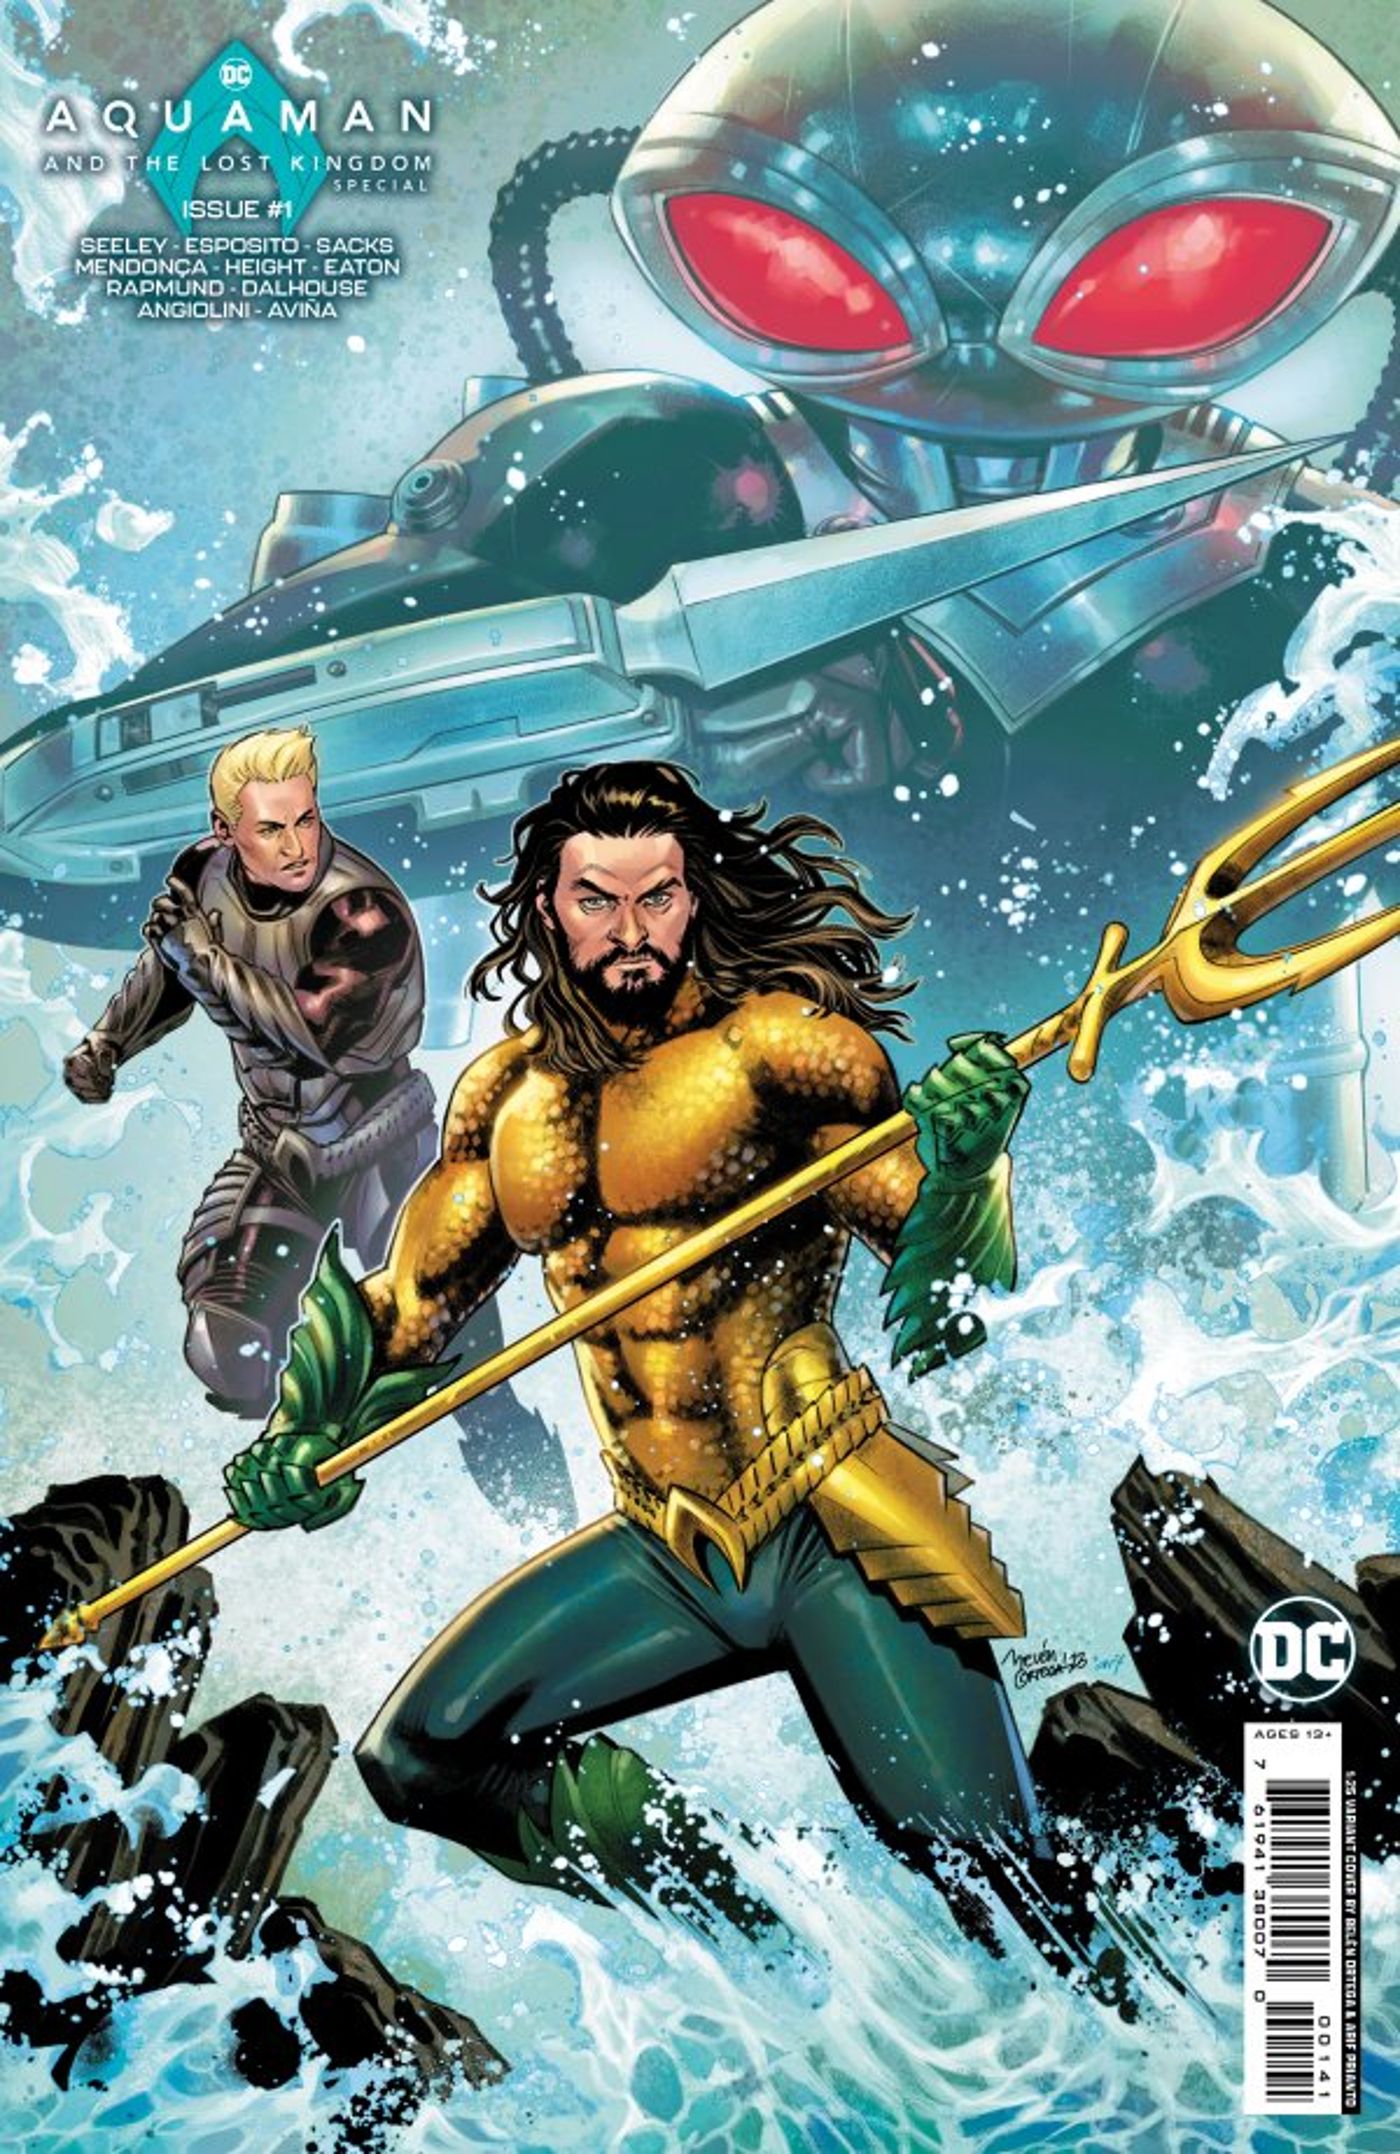 Aquaman and the Lost Kingdom Special #1 (movie tie-in) cover, featuring Orm and Black Manta